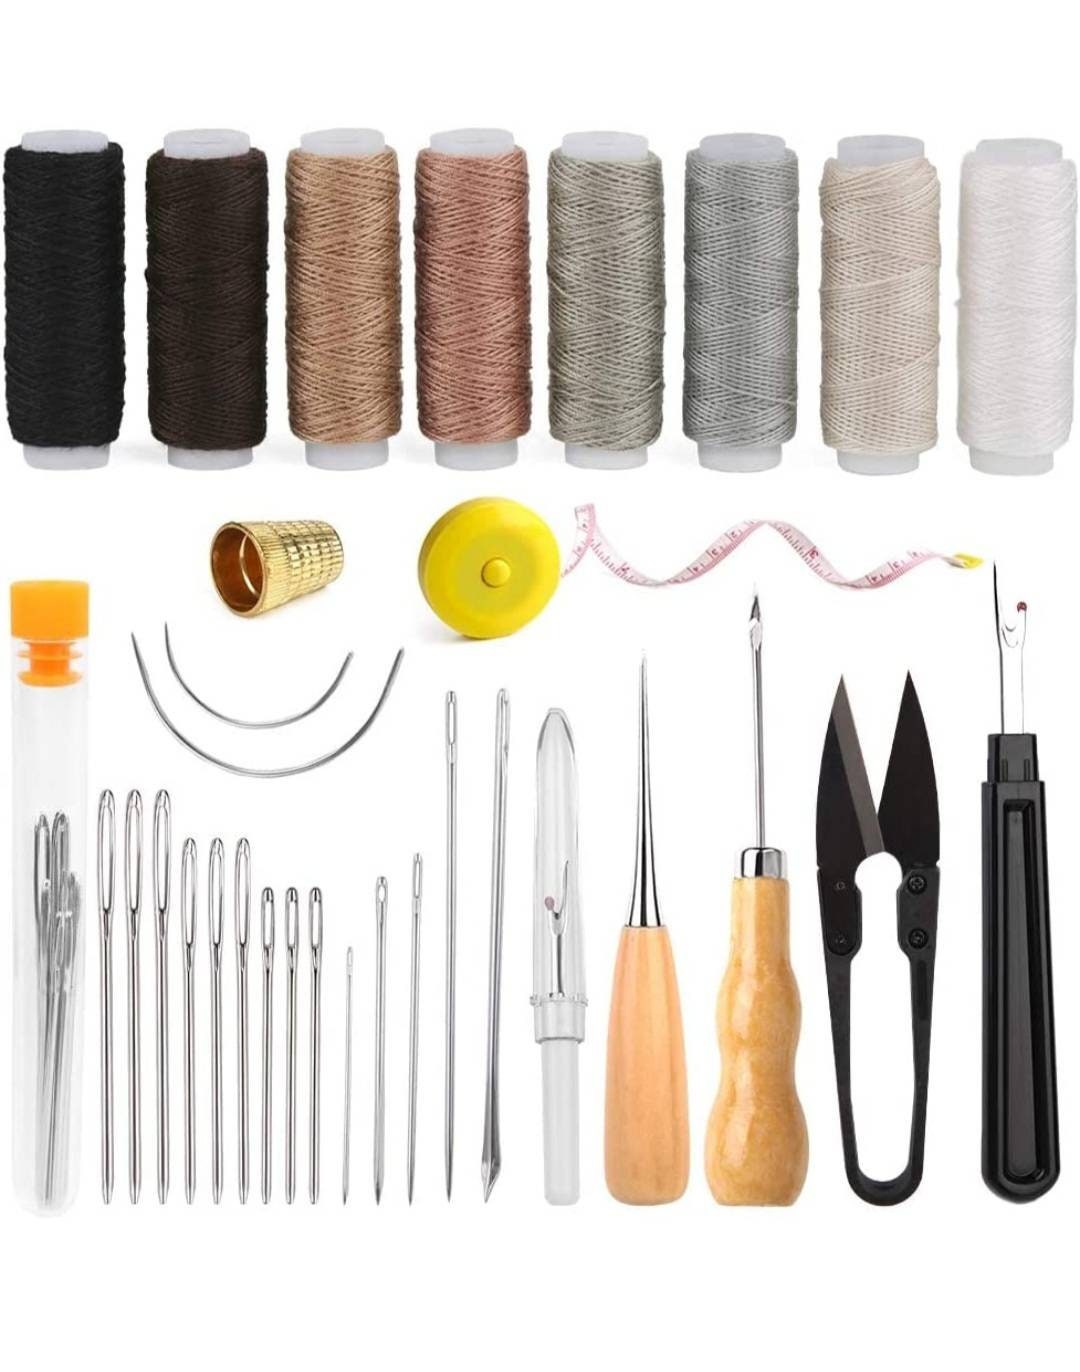 Leather Craft Tools Leather Working Tools Kit with Custom Storage Bag  Leather